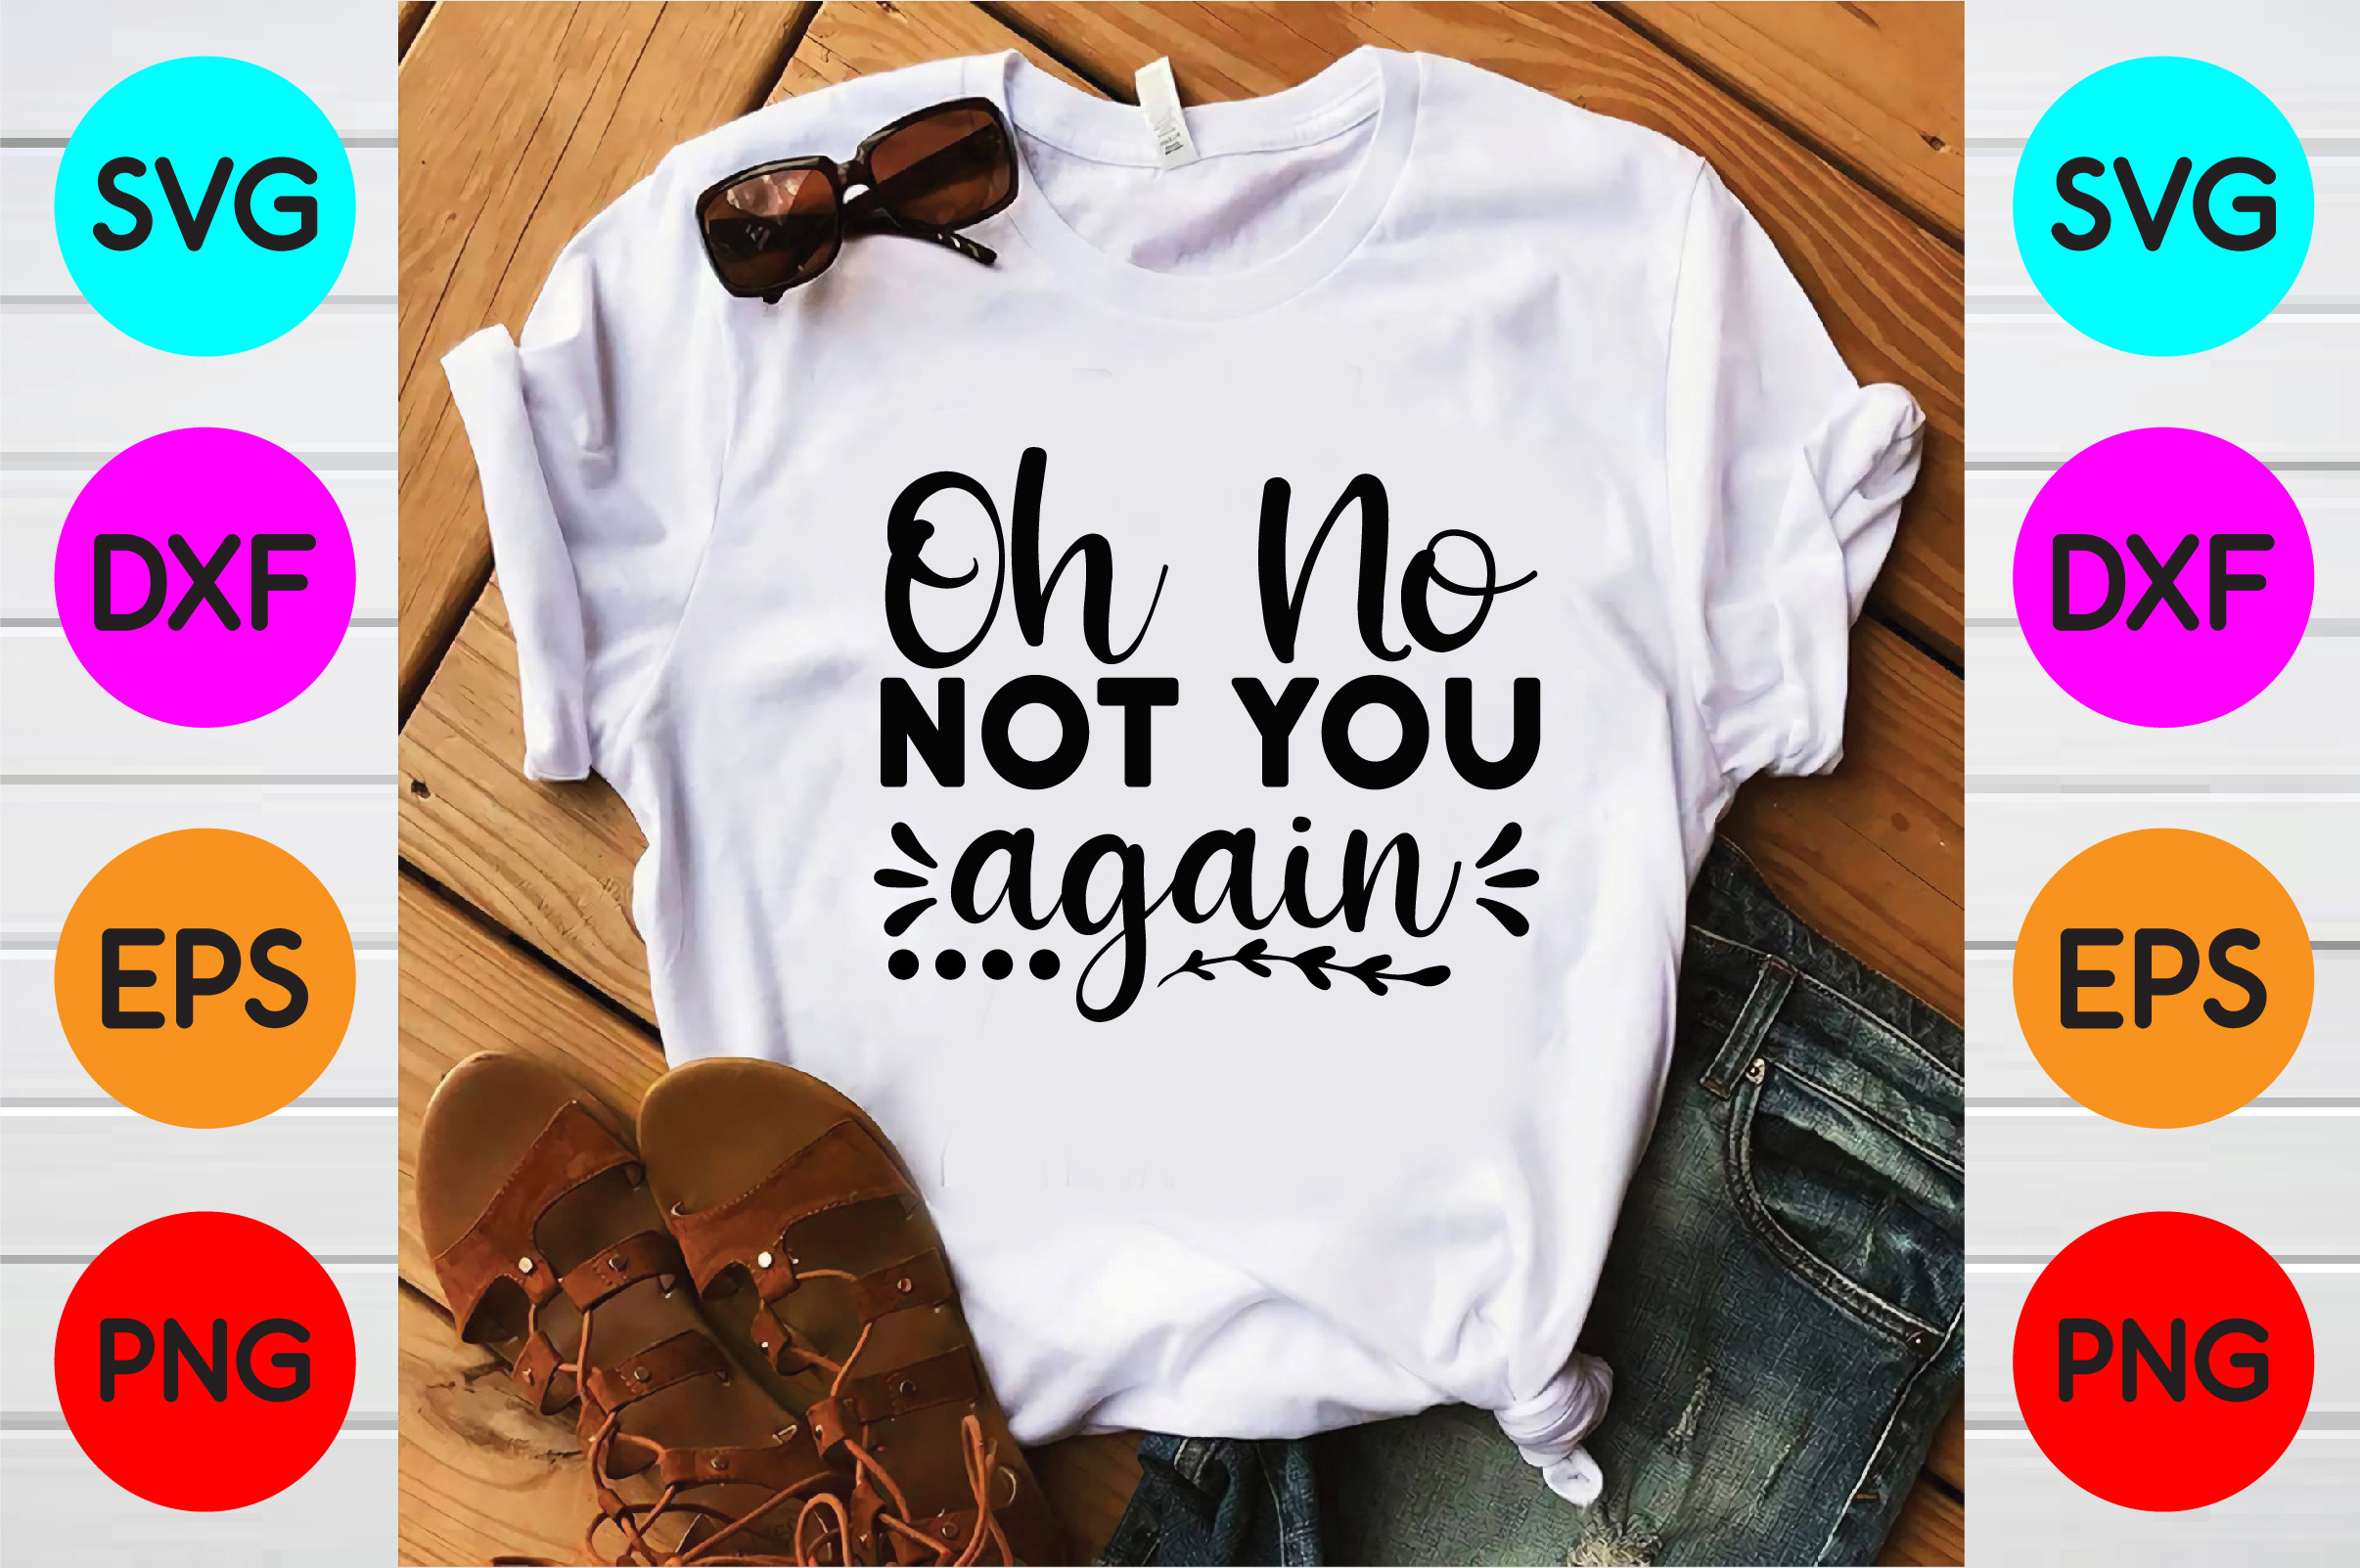 Oh No, Not You Again Svg Designs Graphic by DesignPark · Creative Fabrica